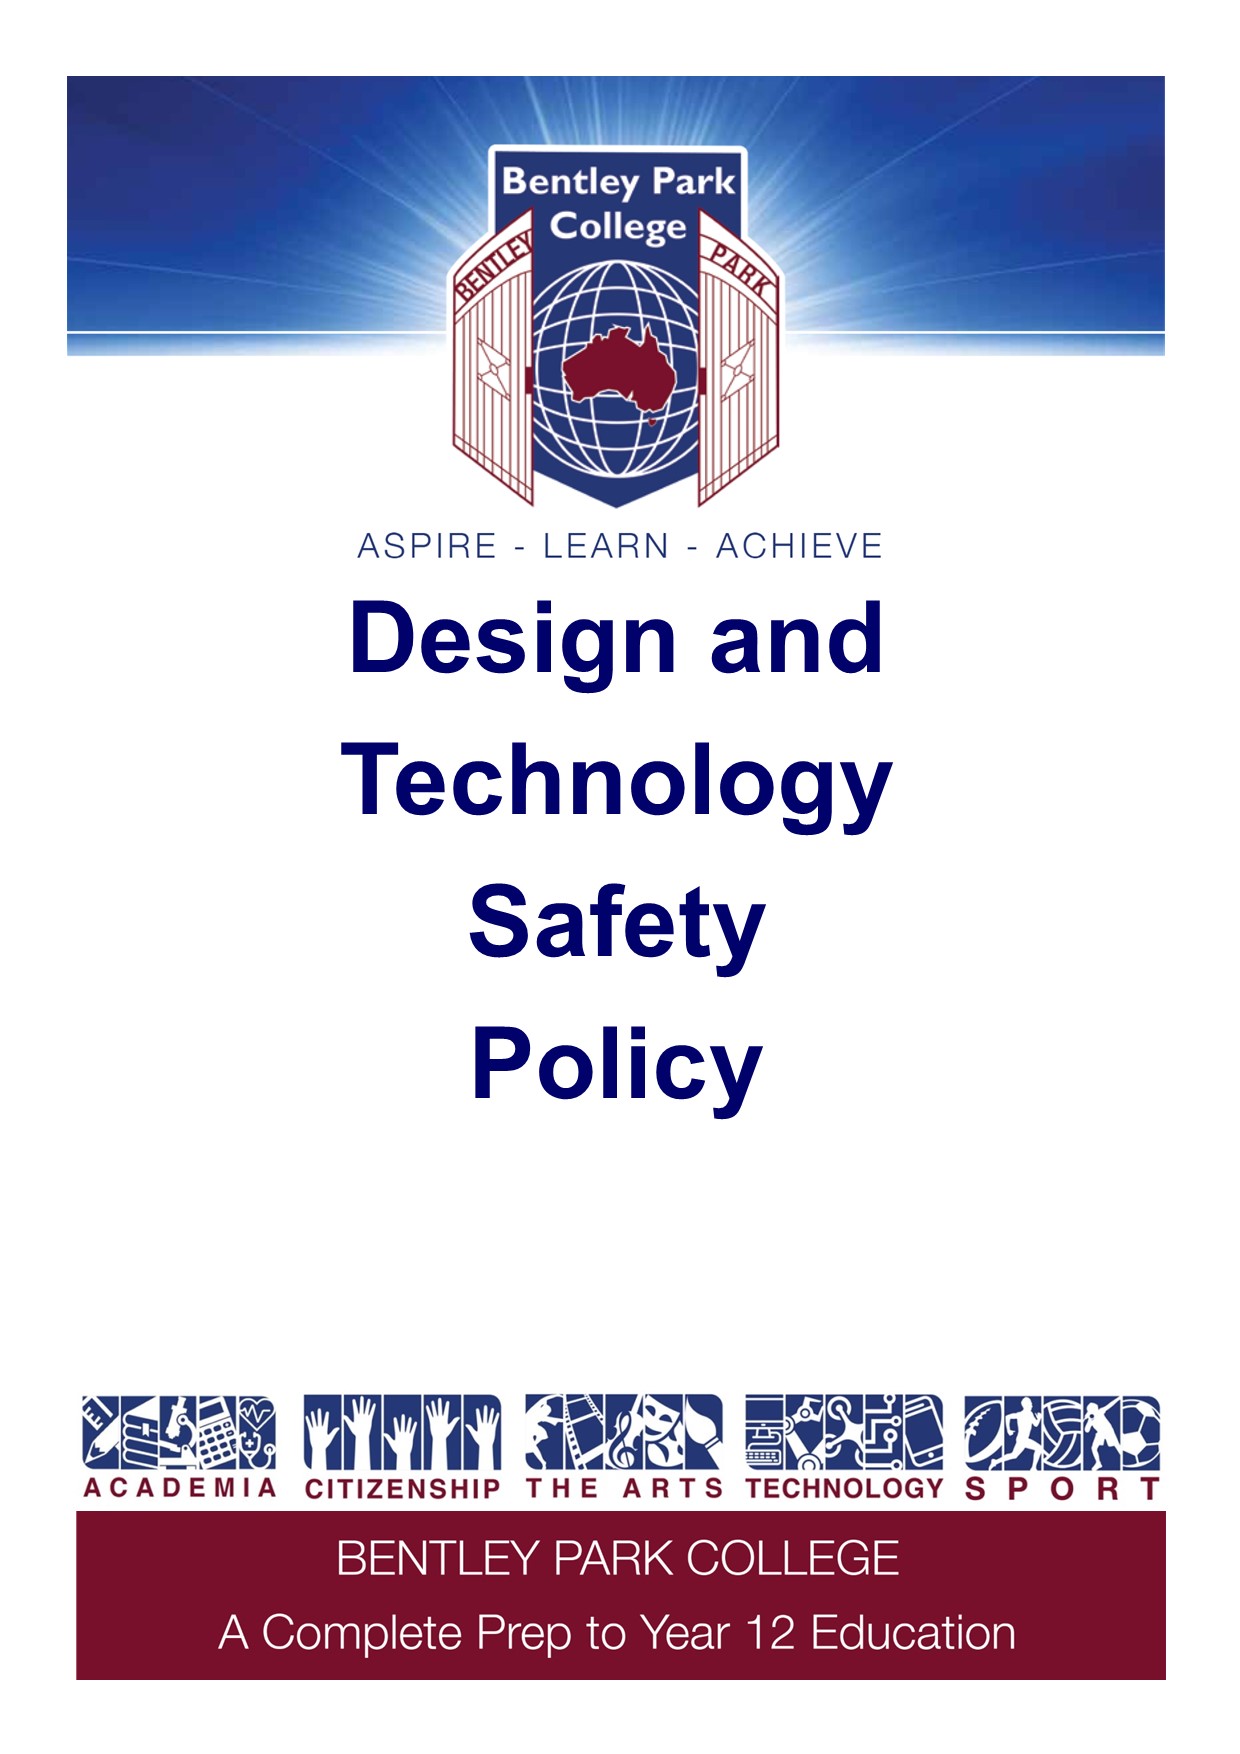 design-and-technology-safety-policy.jpg